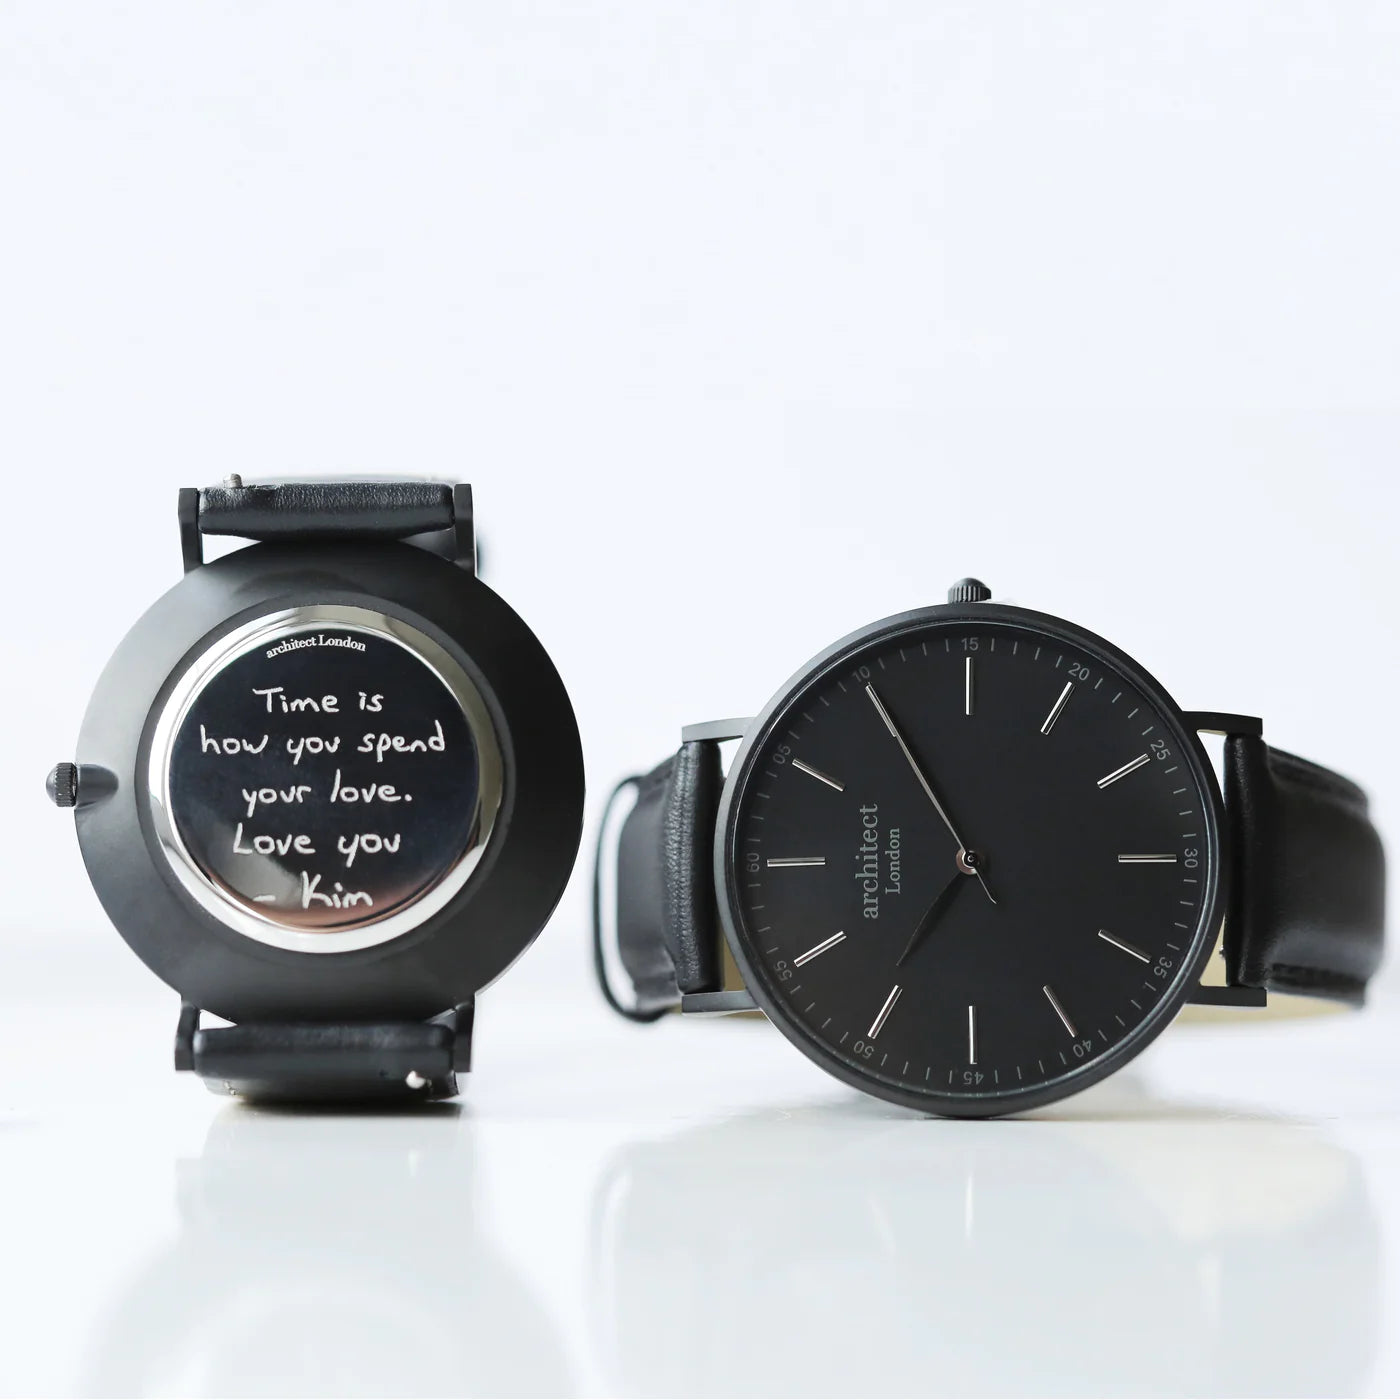 Image of a men's black Architect watch with a black face and leather strap. The back of the watch can be engraved with your own handwritten message or drawing.